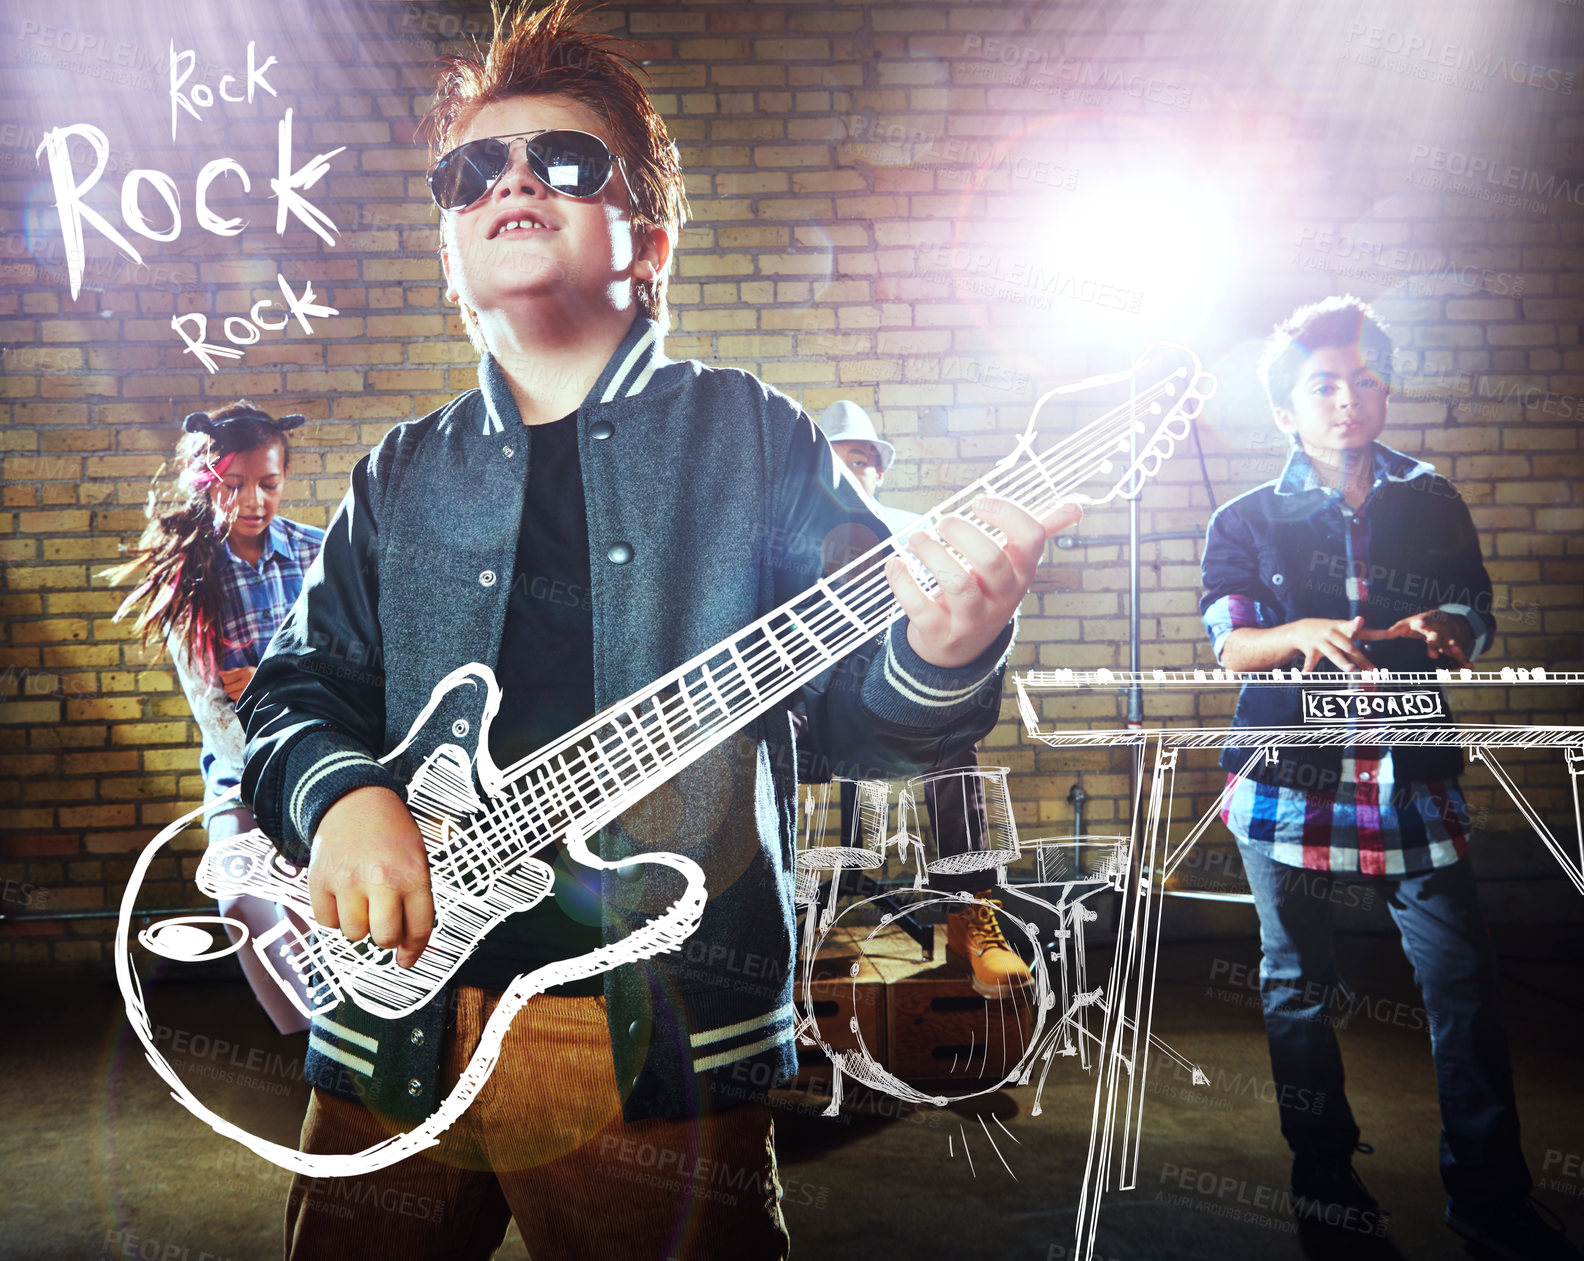 Buy stock photo Shot of children playing rock music on imaginary instruments